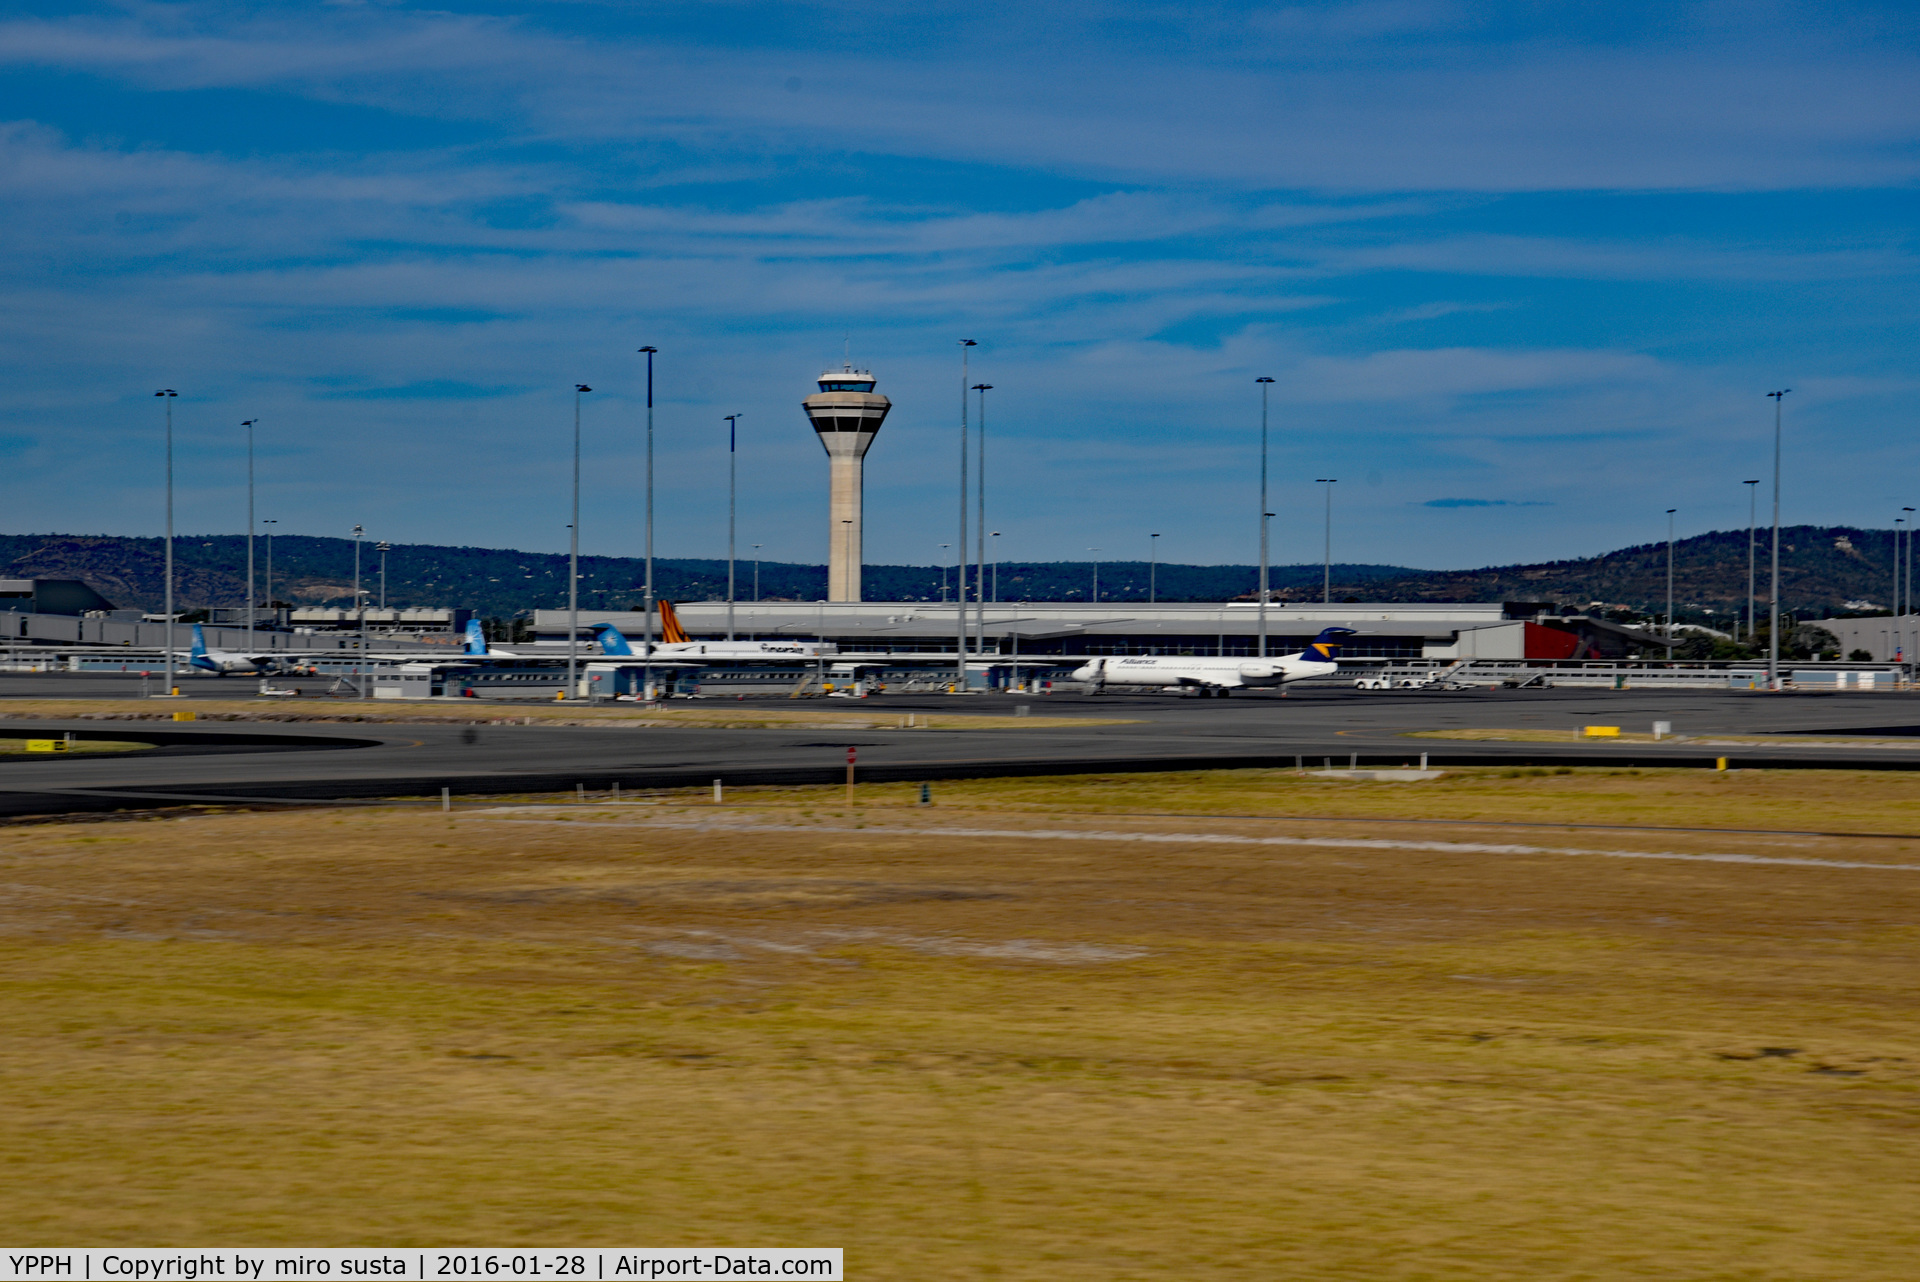 Perth International Airport, Redcliffe, Western Australia Australia (YPPH) - Perth (WA) International Airport